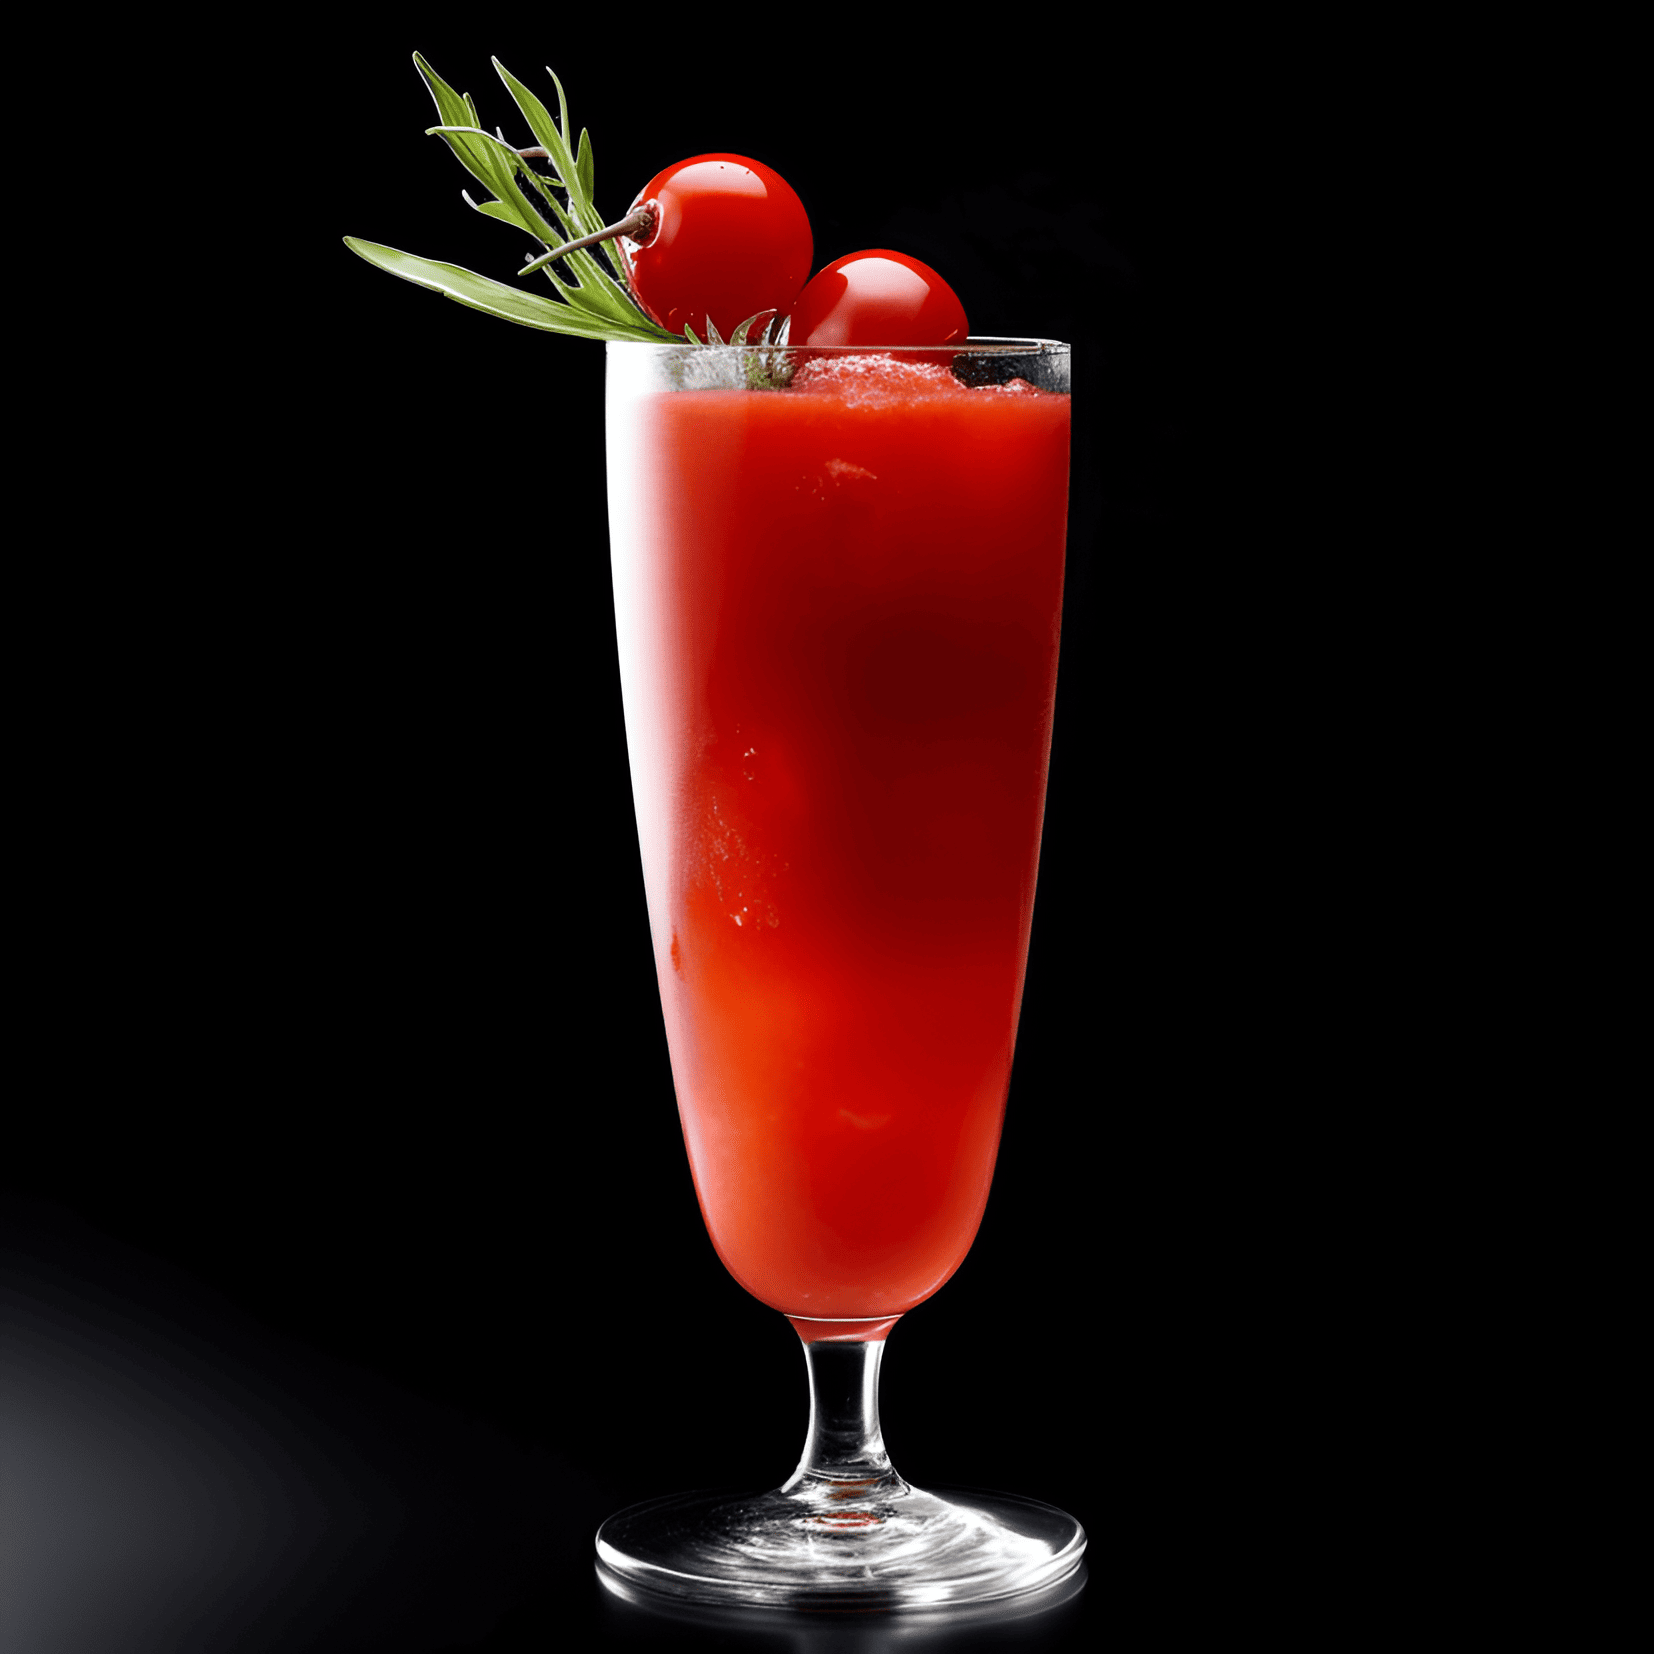 Virgin Mary Cocktail Recipe - The Virgin Mary has a savory, tangy, and slightly spicy taste. It is rich in tomato flavor, with a hint of citrus and a subtle kick from the hot sauce and black pepper. The Worcestershire sauce adds a touch of umami, making it a well-rounded and satisfying non-alcoholic beverage.